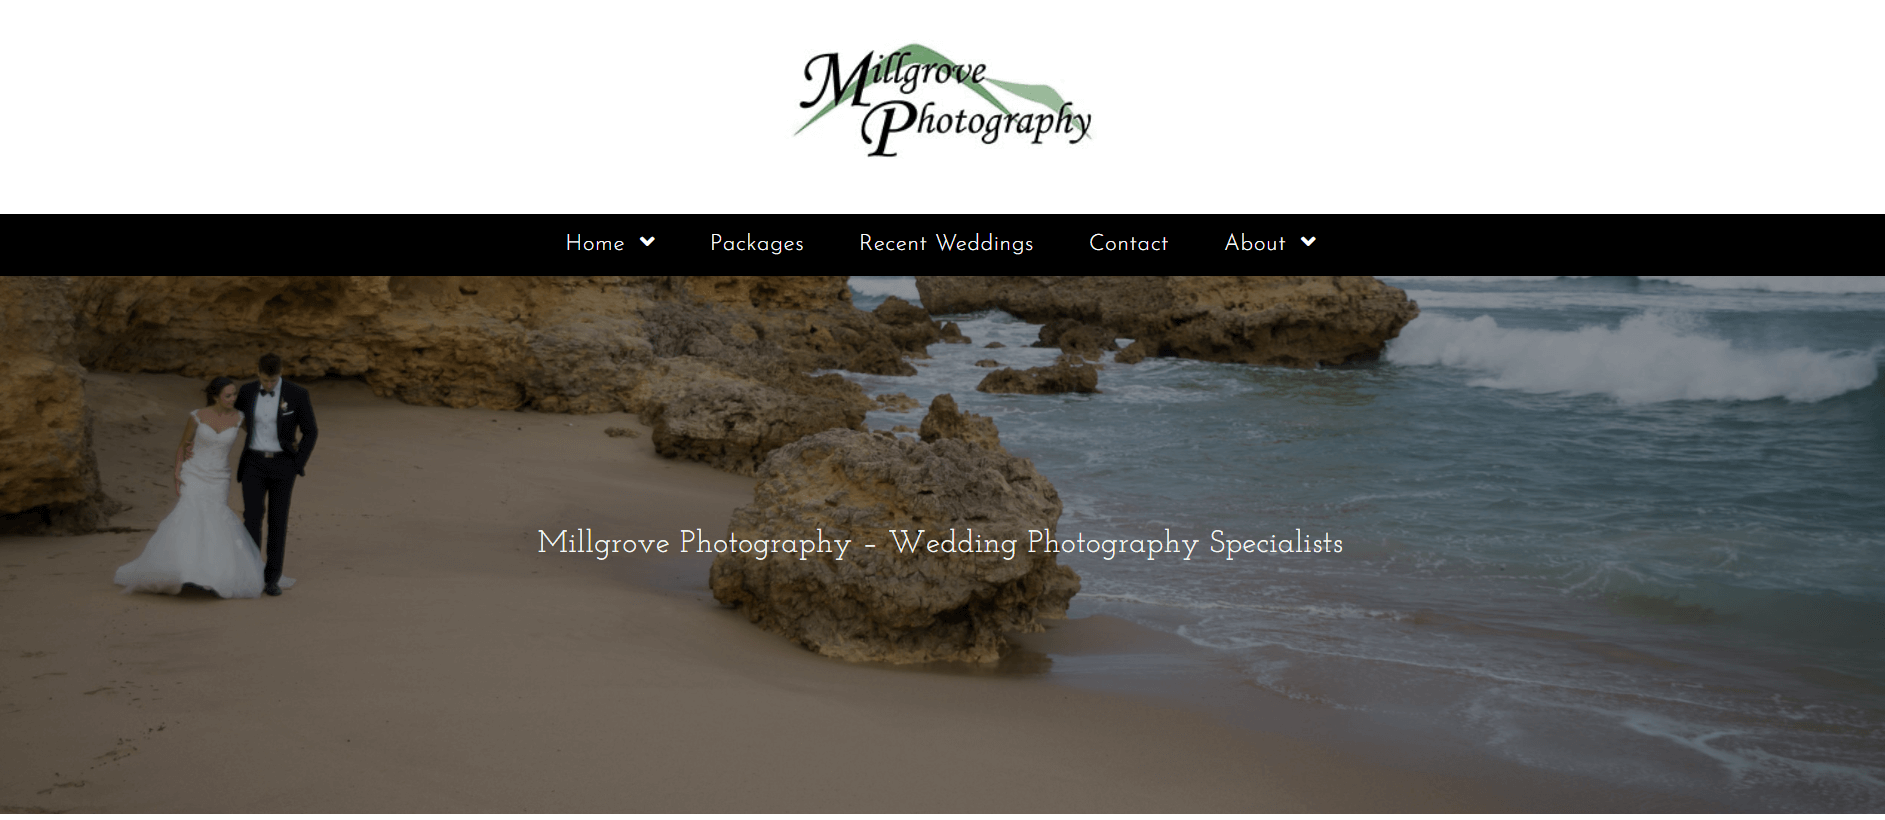 Top 30 Wedding Photographers Yarra Valley [2021]  by Wild Romantic Photography Melbourne